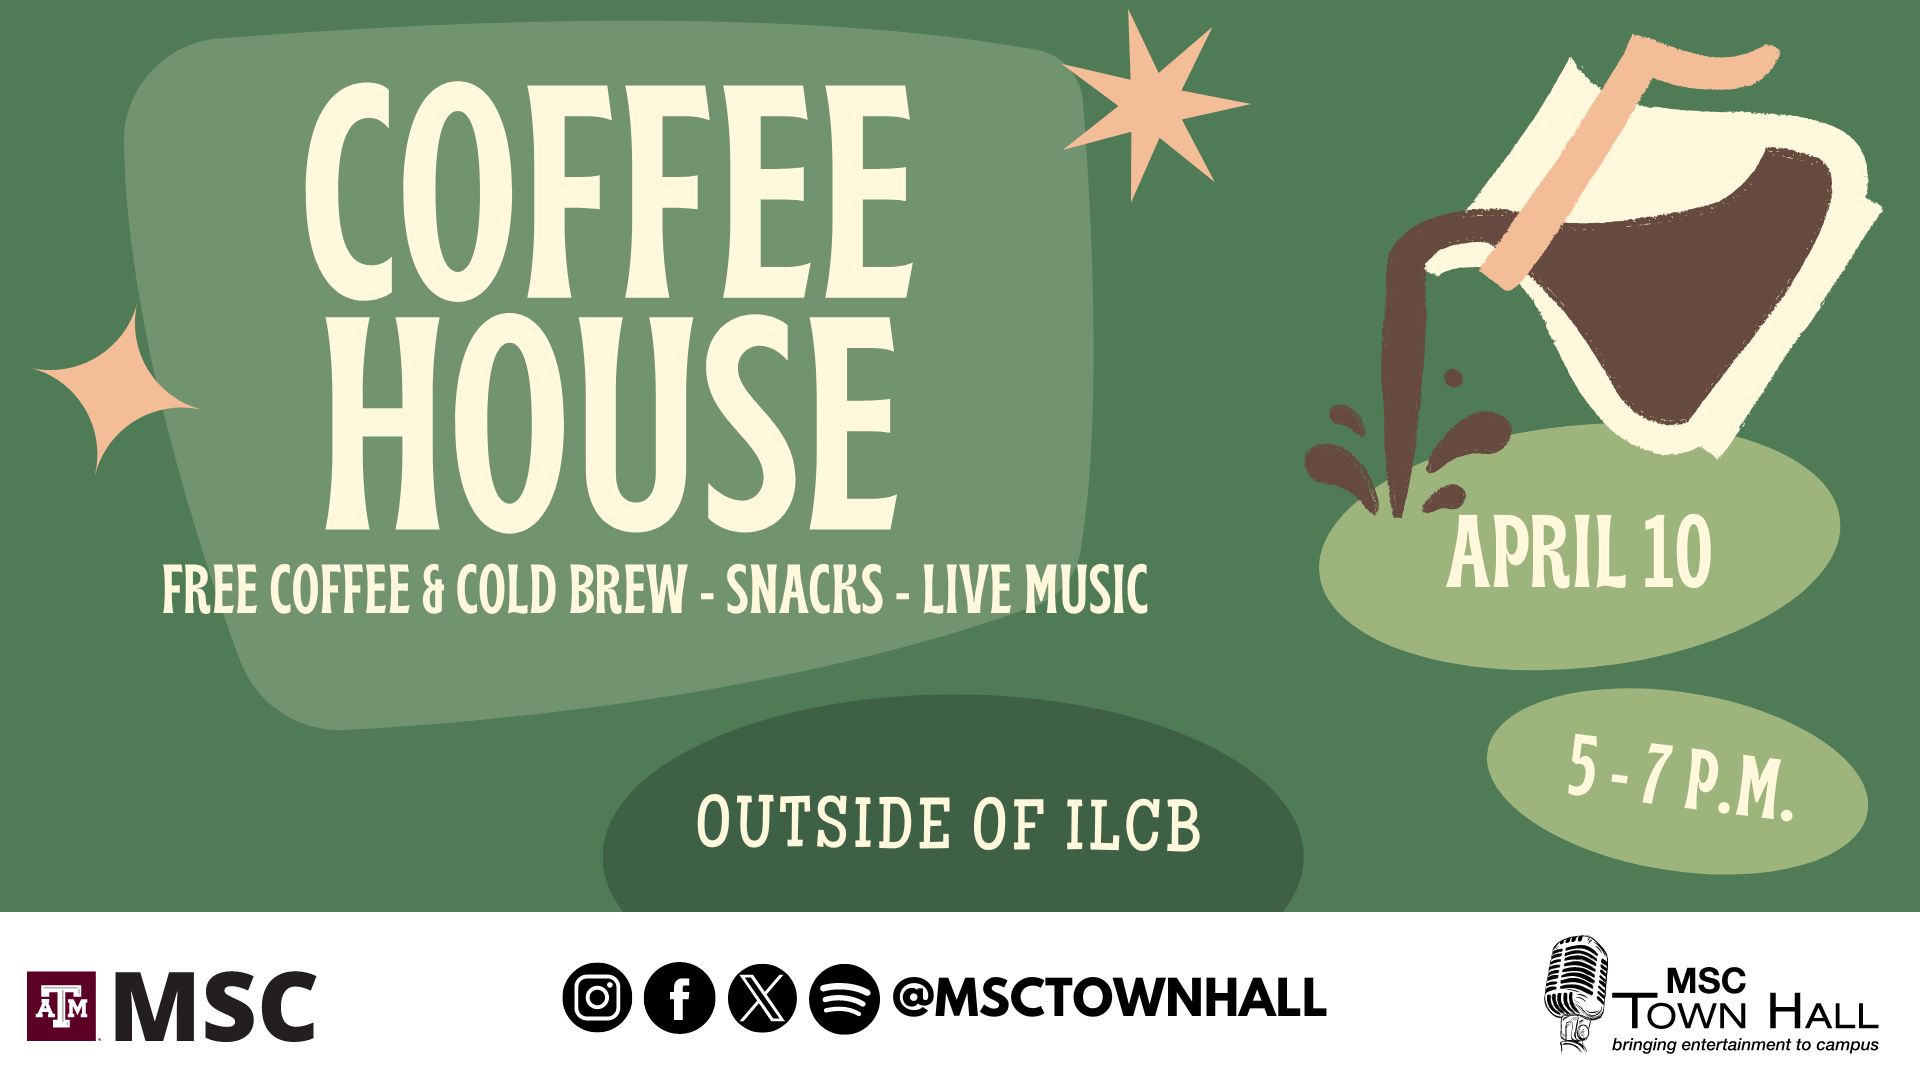 MSC Town Hall Presents CoffeeHouse, April 10 from 5 to 7 p.m. Outside of ILCB. Free Coffee and Cold Brew, snacks and live music. Instagram , Facebook, Twitter, Spotify @msctownhall